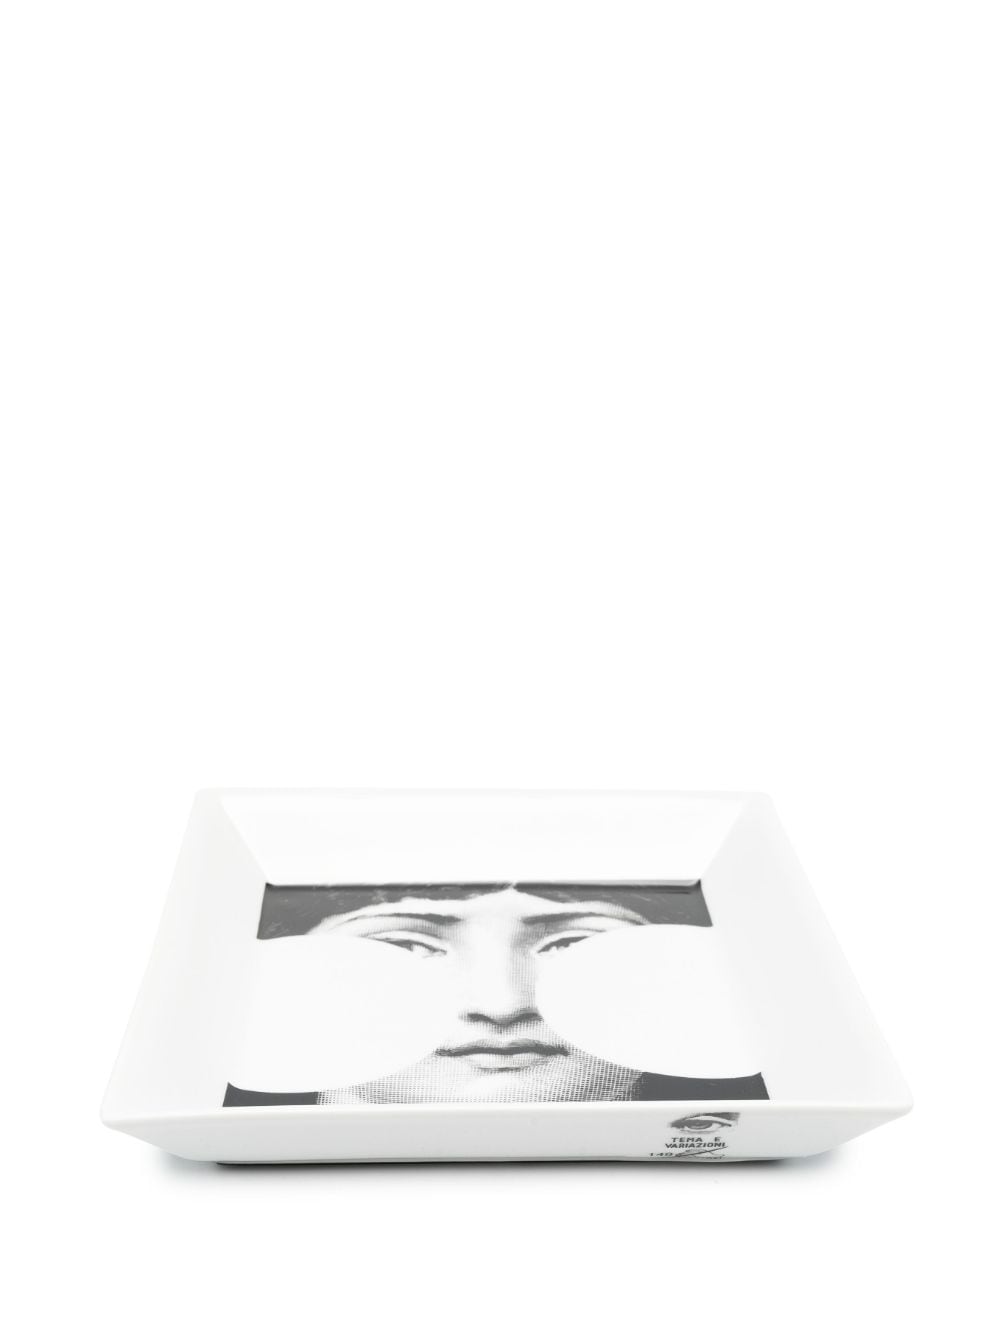 Shop Fornasetti Tema E Variazioni N.149 Plate In Weiss